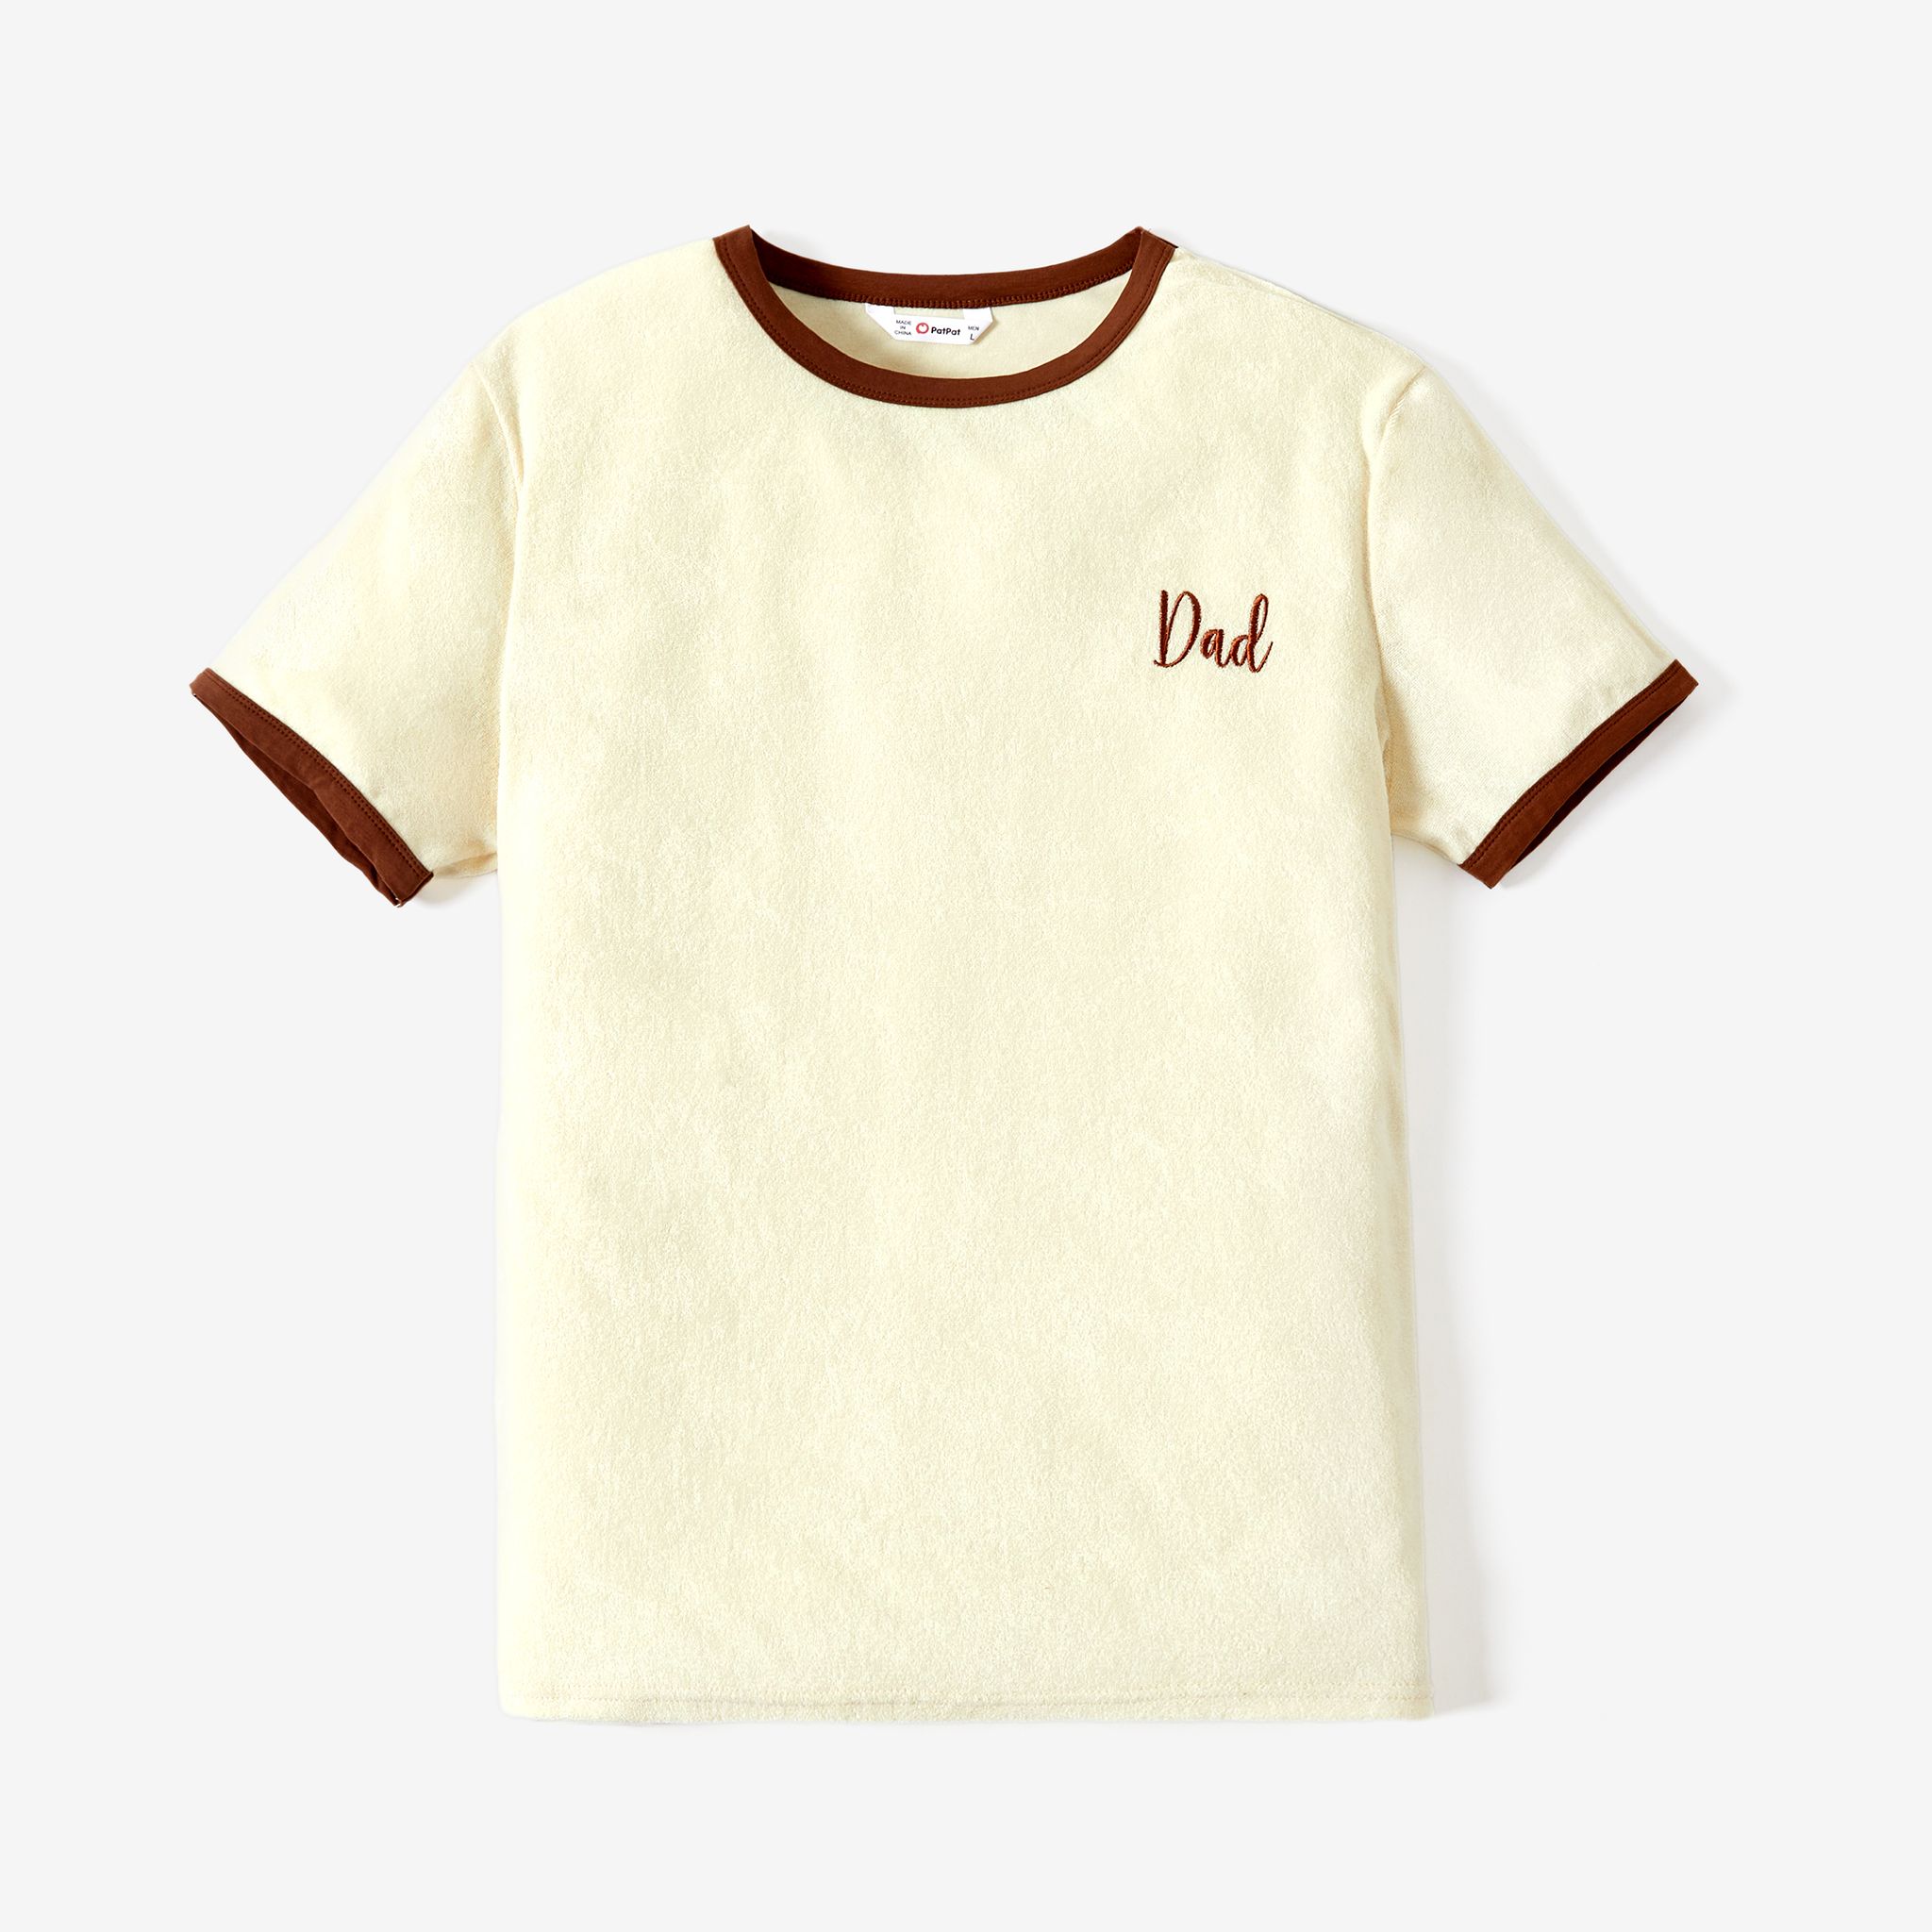 Family Matching Casual Solid Color Letters Print Terry Towel Fabric Short-Sleeve T-shirts Tops